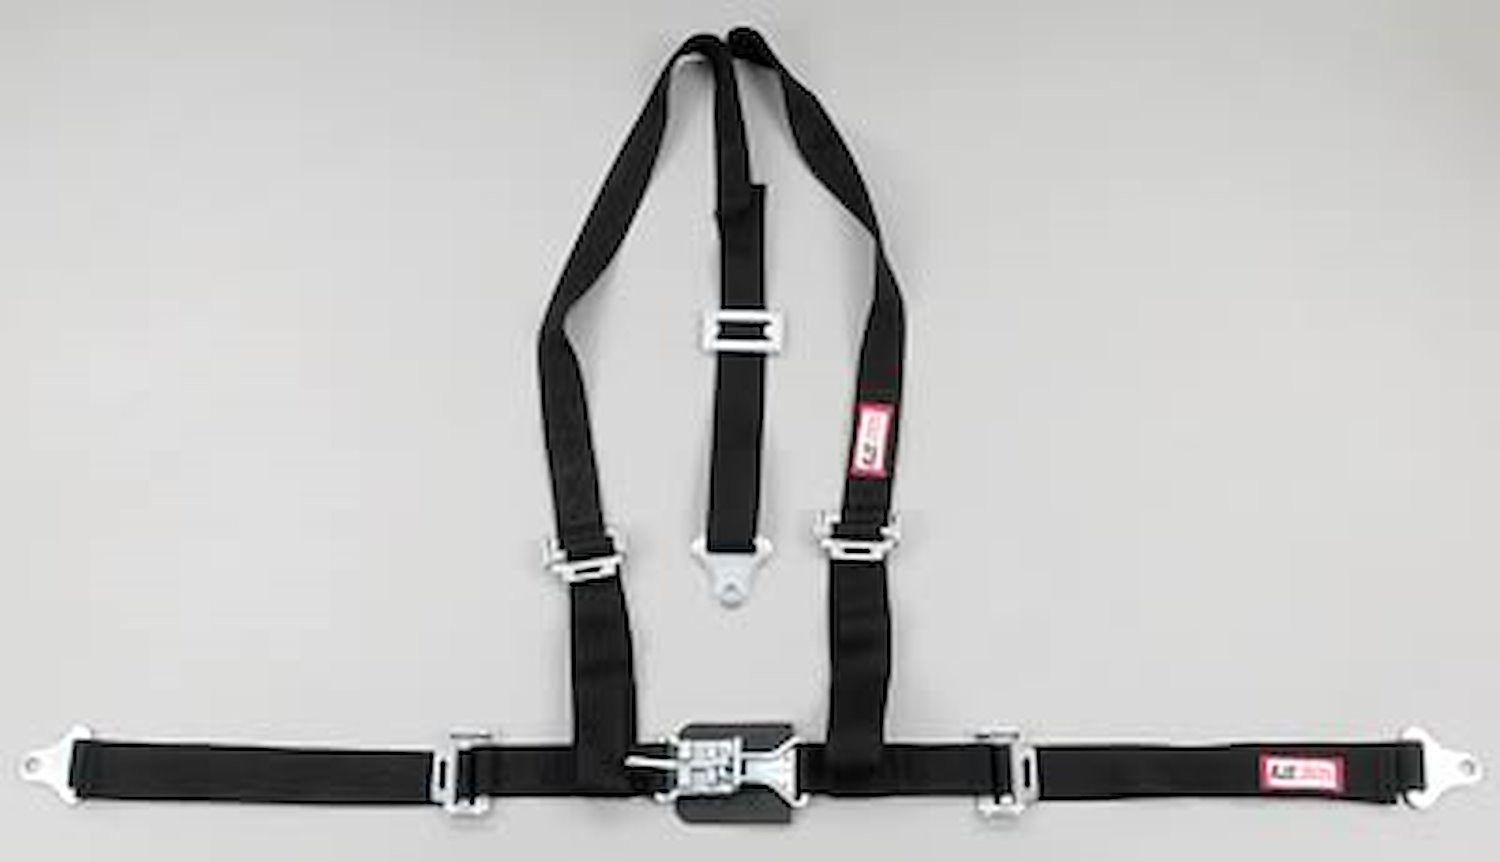 NON-SFI L&L HARNESS 3 PULL DOWN Lap Belt SNAP SEWN IN 2 S.H. Individual FLOOR Mount WRAP/BOLT YELLOW